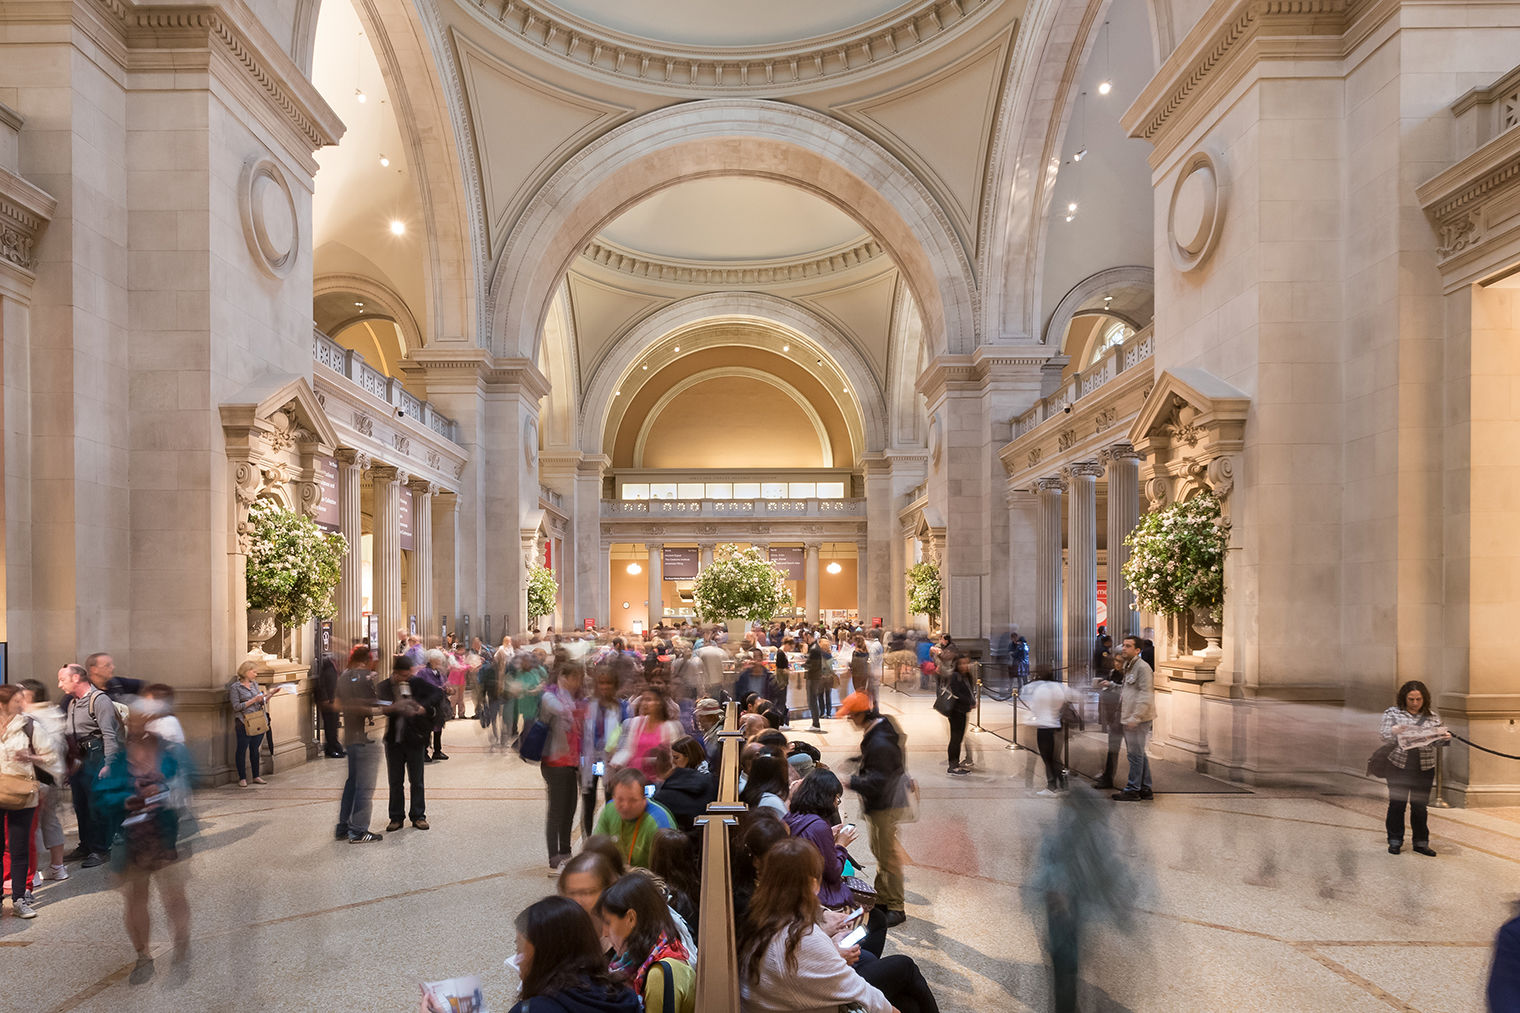 A bustling photo: people are gathered at the information desk, looking at maps, and resting in seats, against the majestic columns and domes of The Met's Great Hall.